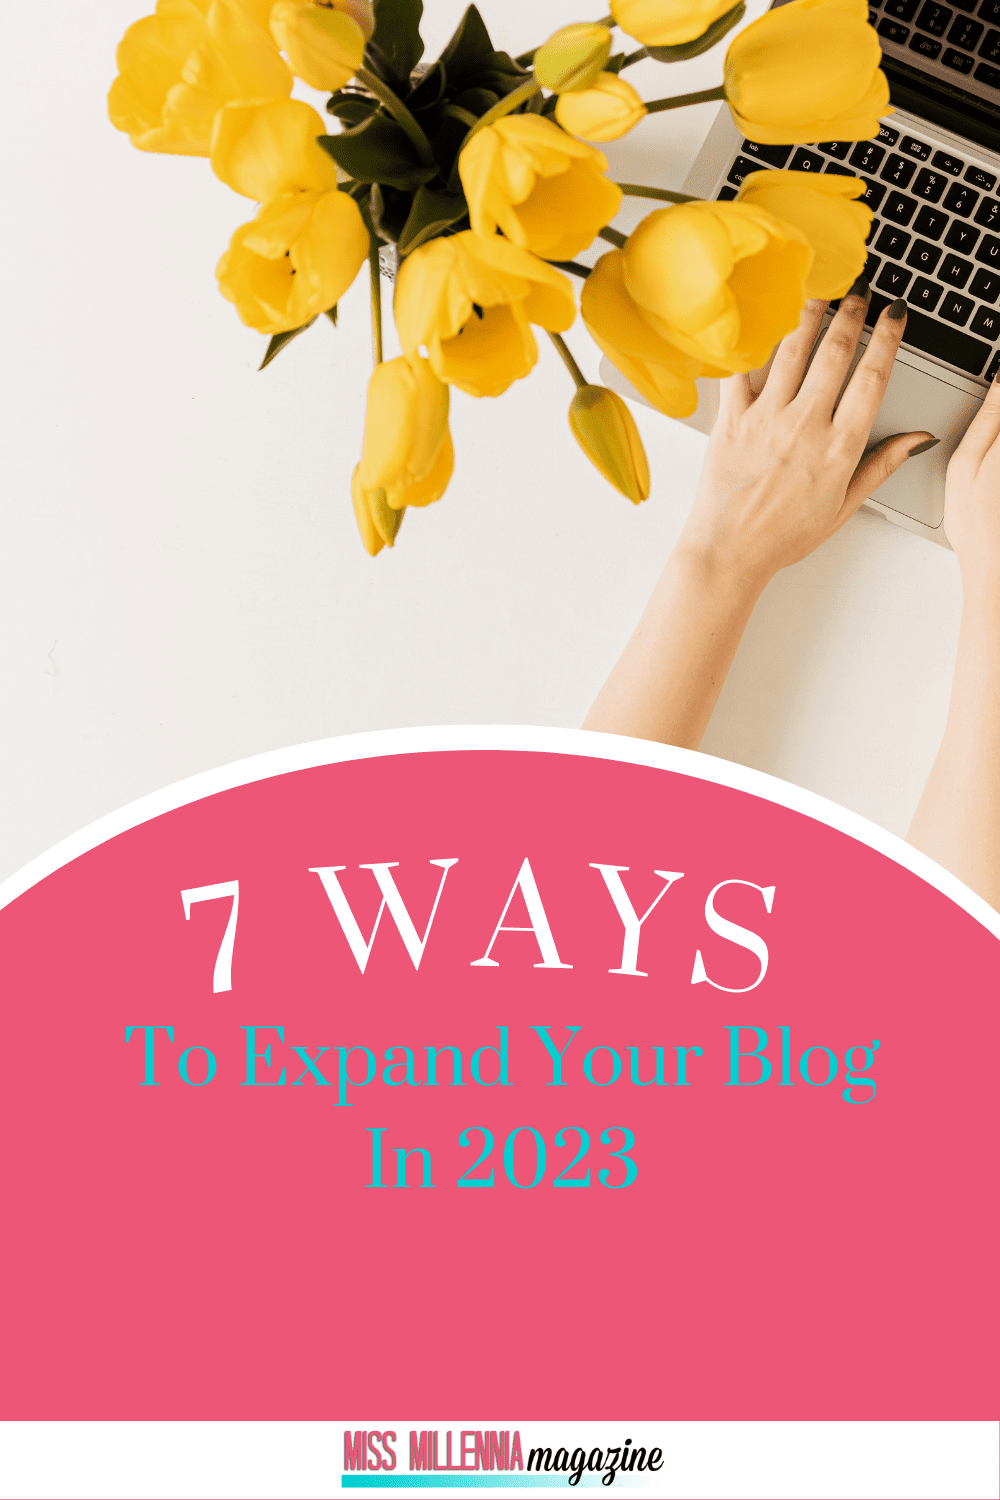 7 Ways To Expand Your Blog In 2023